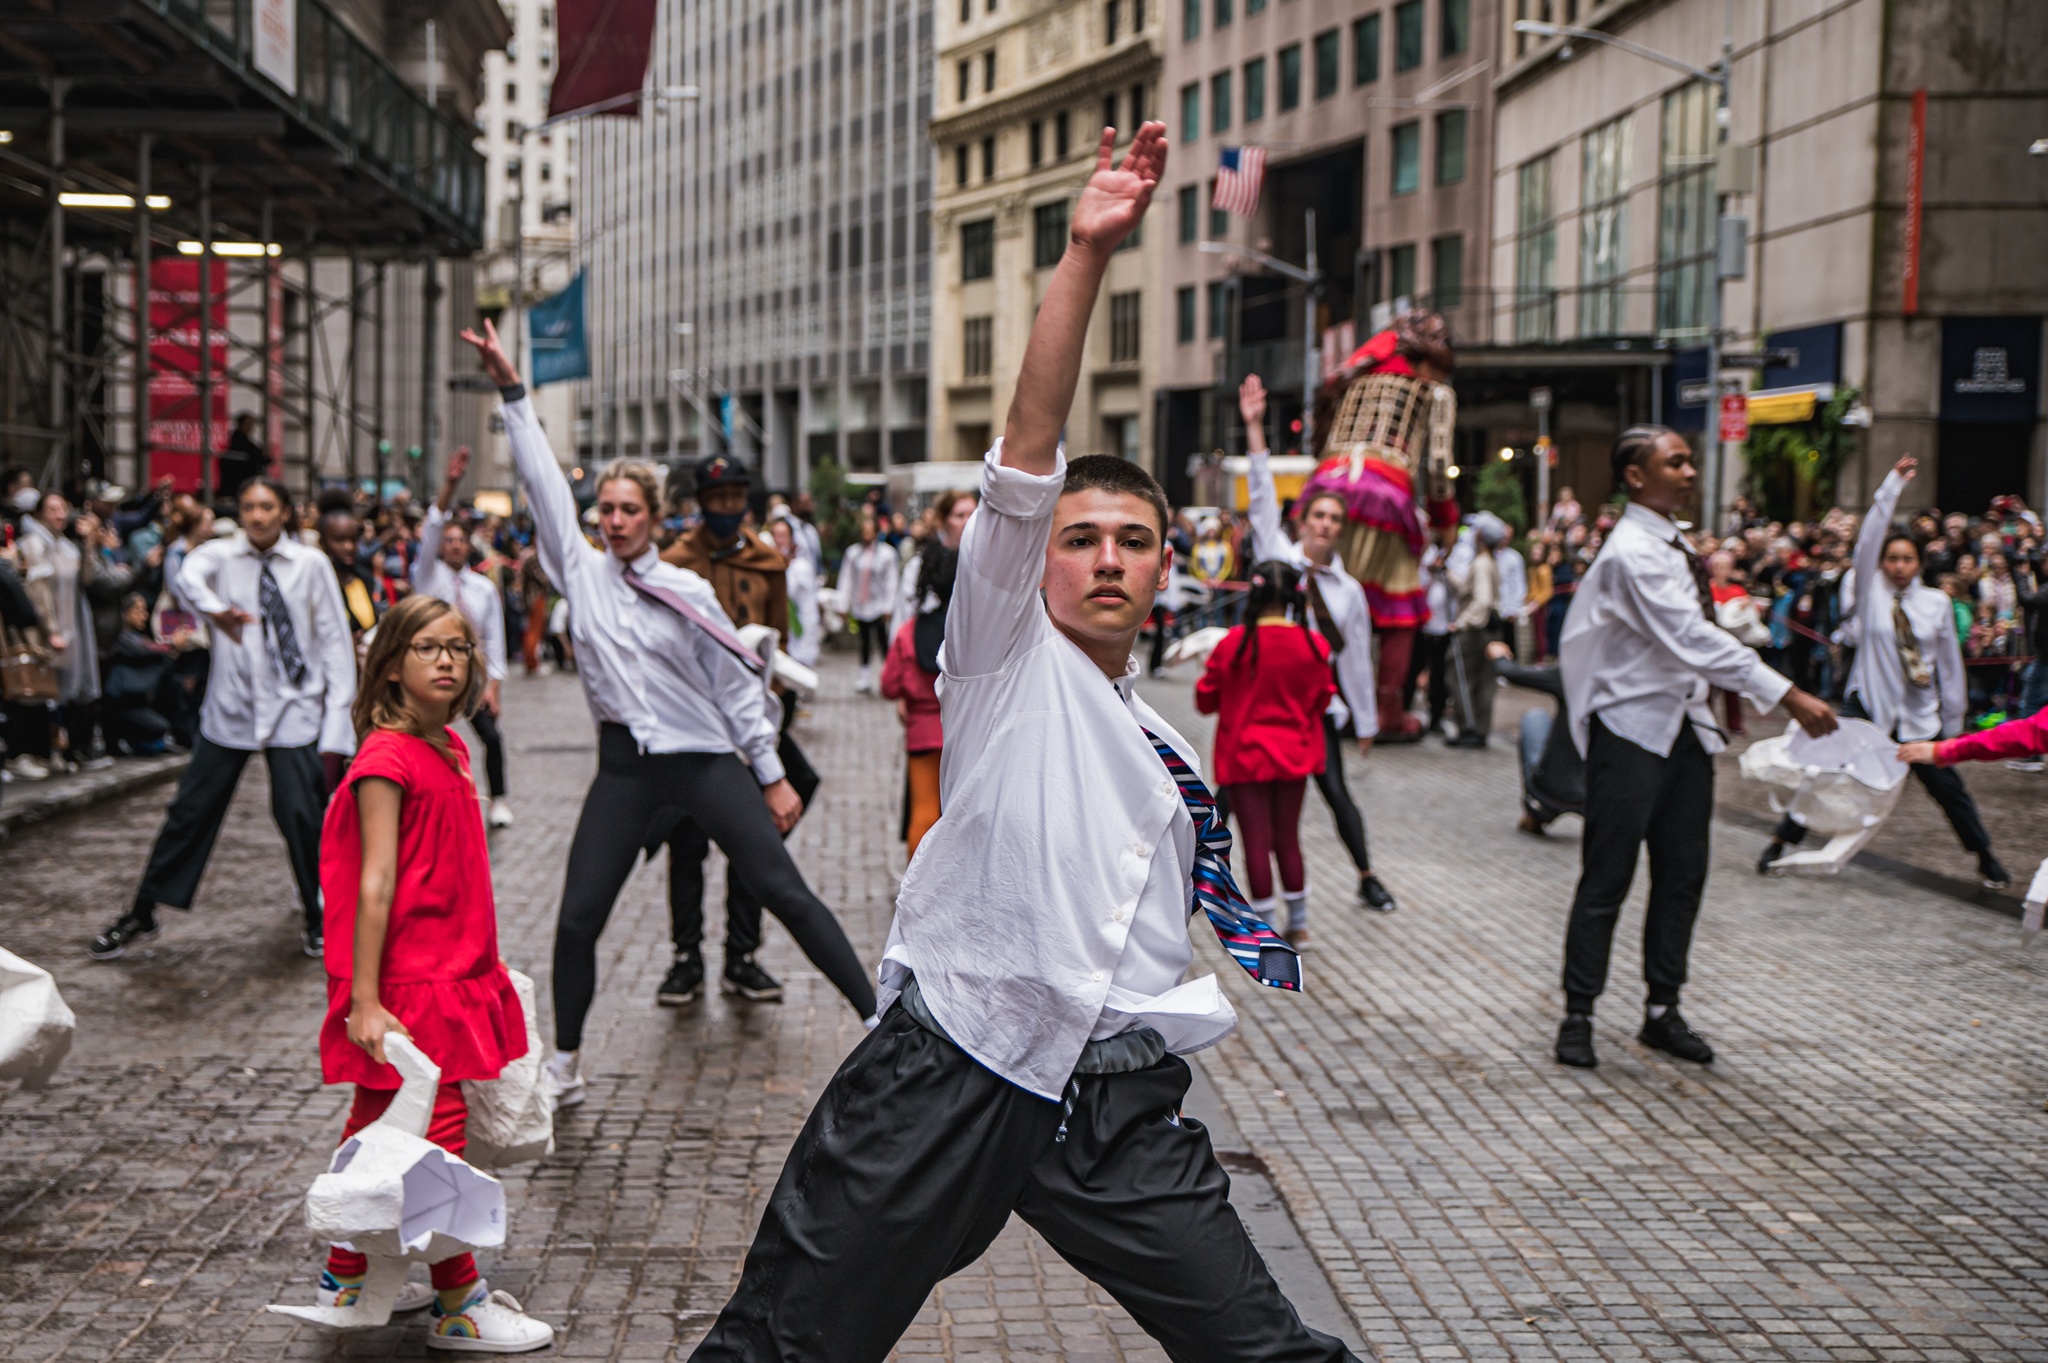 A group of dancers appear on Wall Street, wearing white button ups, black slacks, and ties, with an arm stretched upward. A single dancer with a shaved head can be seen in the foreground. Young children wearing bright colors stand among the dancers and watch on while holding bull head masks. Behind them, the puppet Little Amal can be seen.